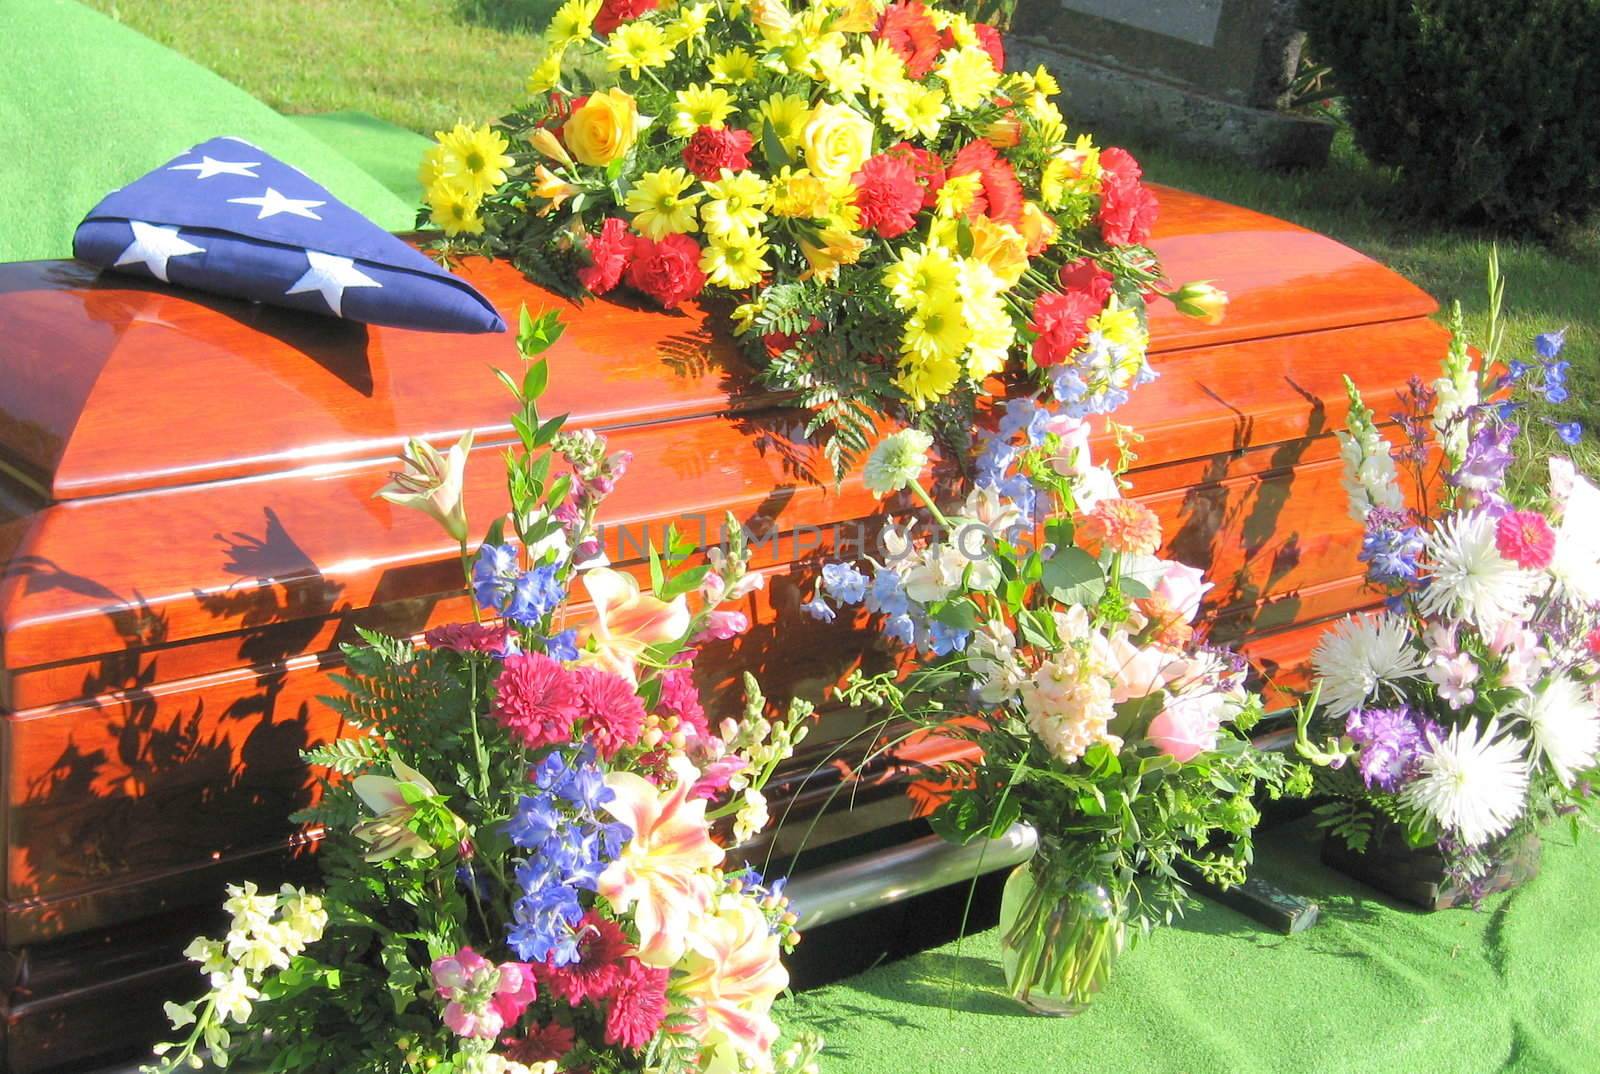 at graveside, flowers and the US flag honor the casket of a US military veteran